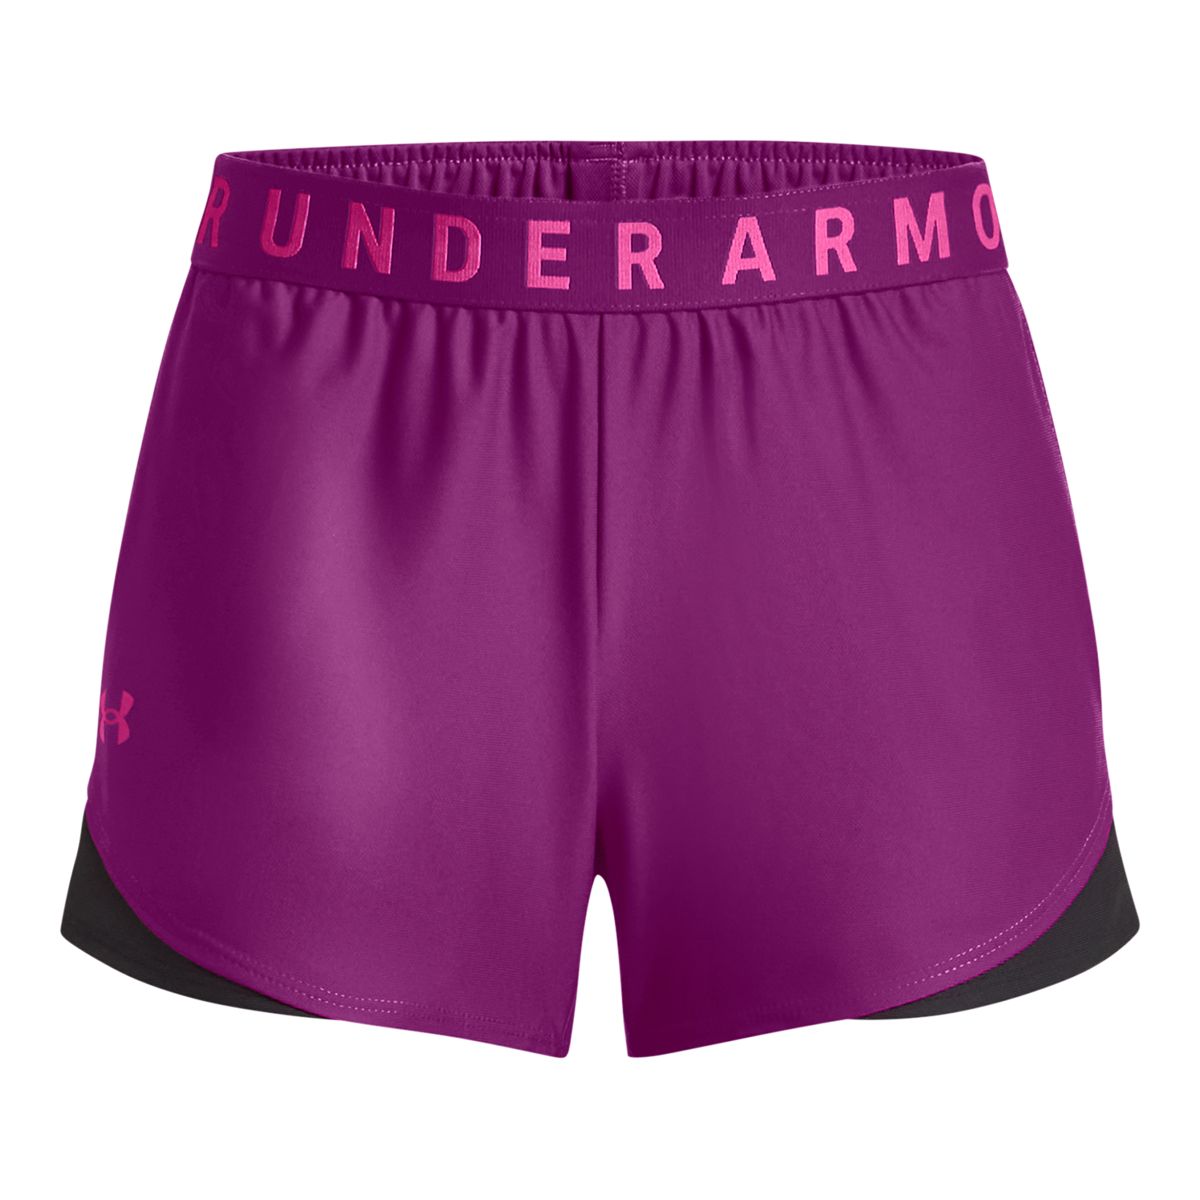 MWP Under Armour Women's Game Time 5 Short - Black